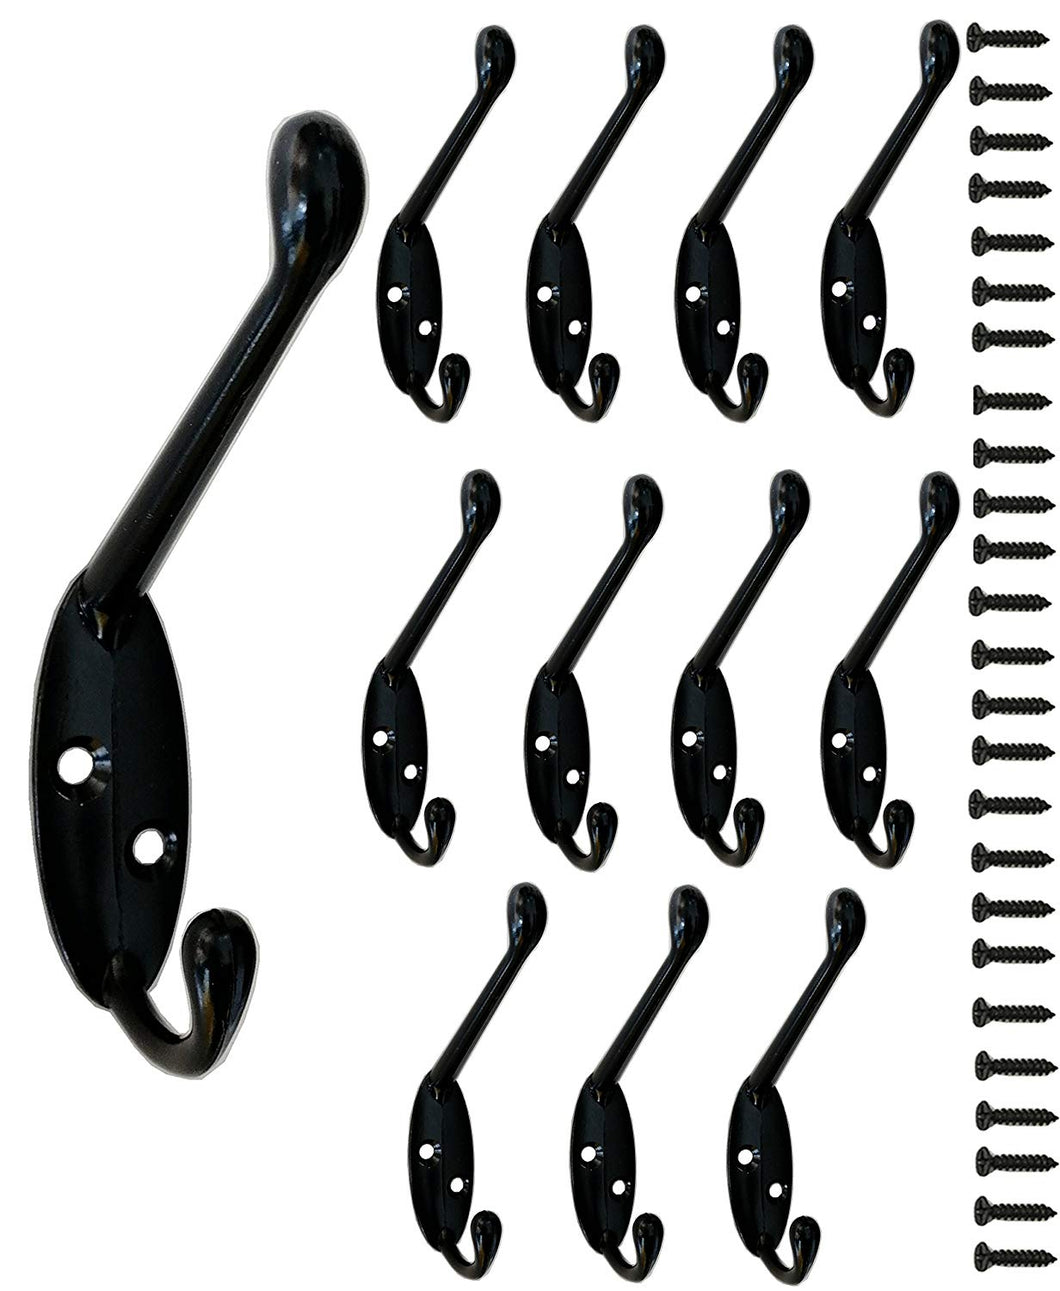 12 Pack Metal Decorative Dual Coat Hooks Wall Mounted Double Coat Hanger for Hat hardware Dual Prong Retro Coat Hanger with 26 Screws Black Color